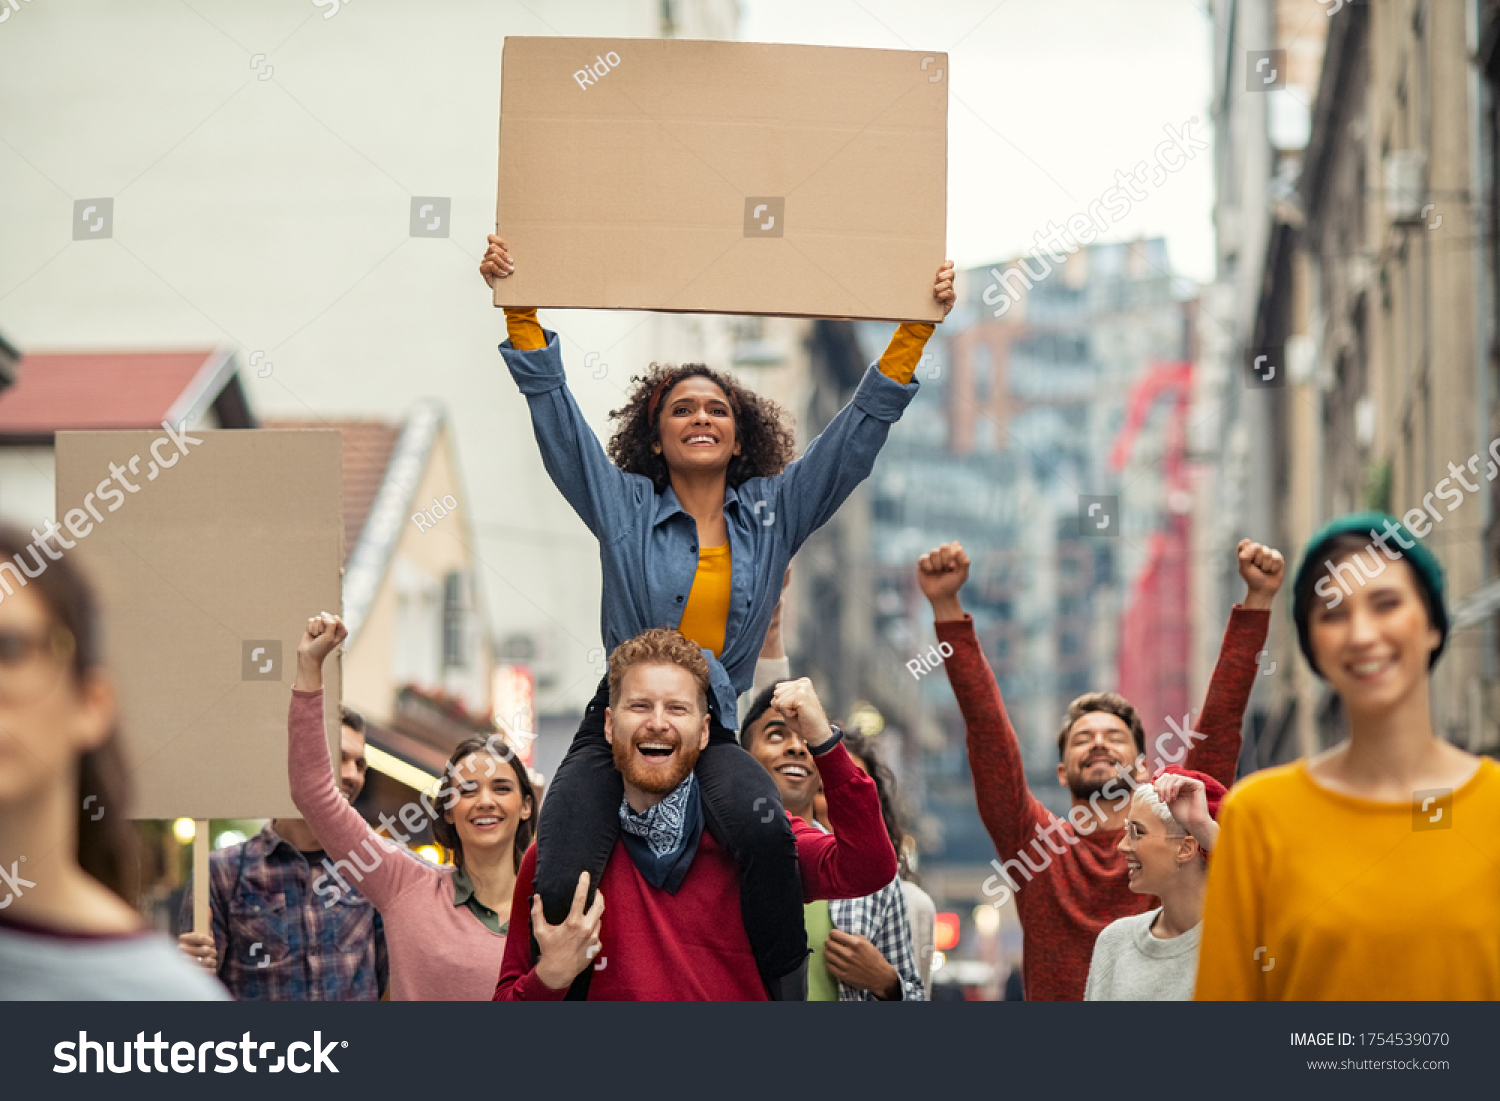 Group of multiethnic people on street holding blank cardboard placard celebrating victory during a protest. Group of content men and smiling women marching through a city. People protesting on road. #1754539070